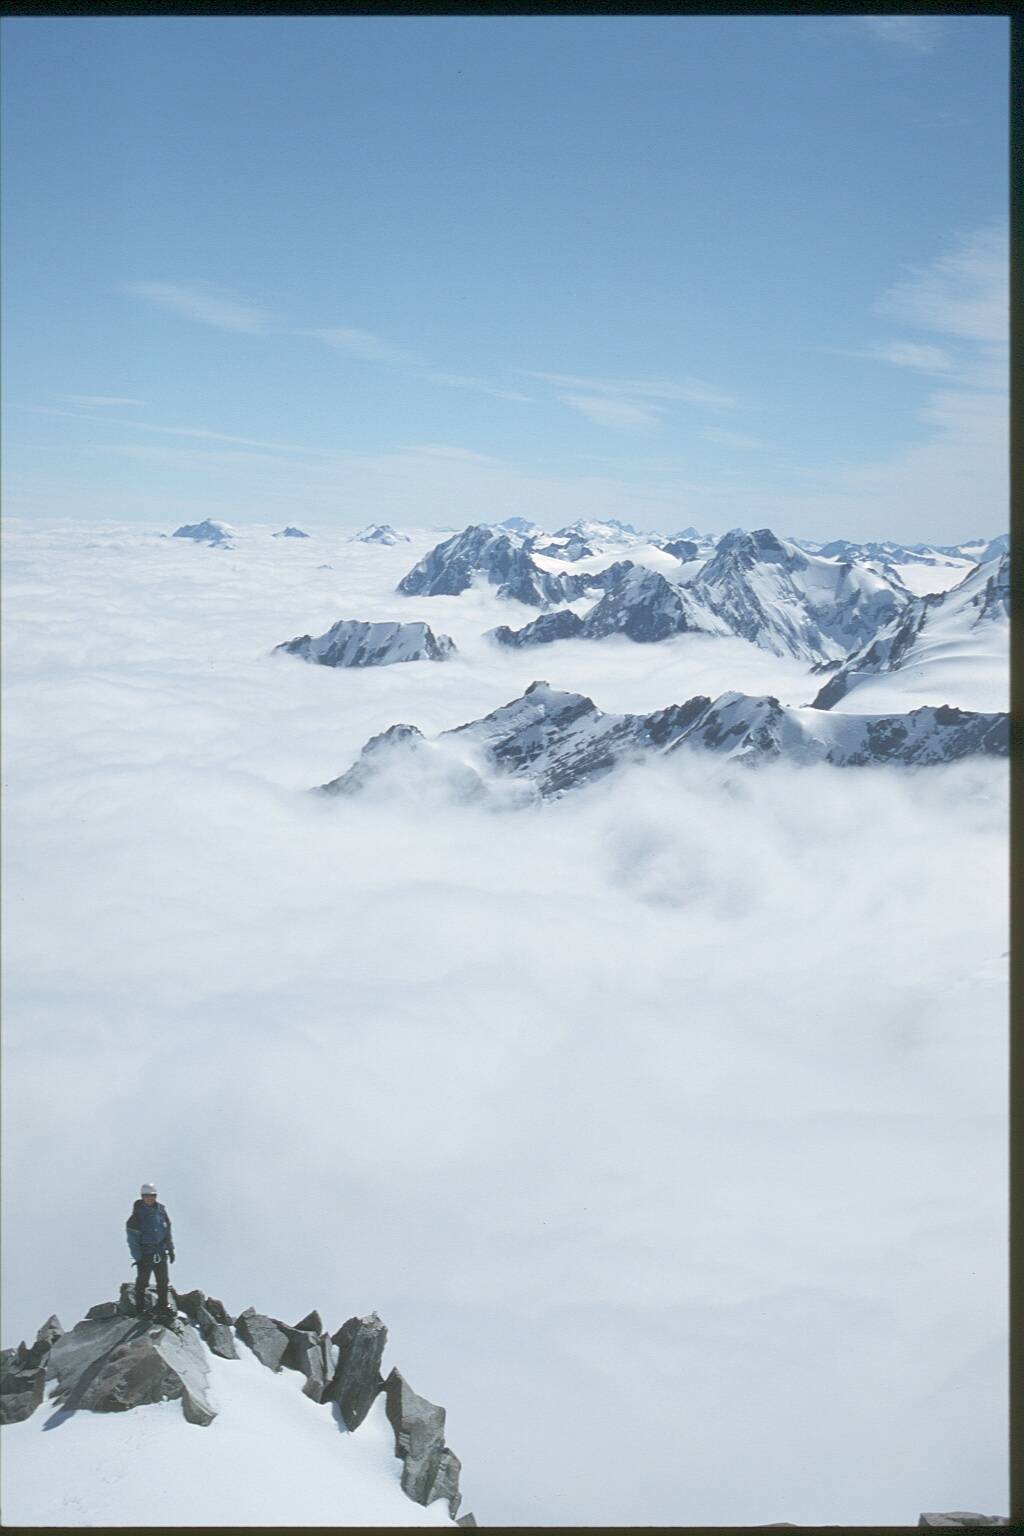 Above the clouds at Mt Cook - photo competition winner!